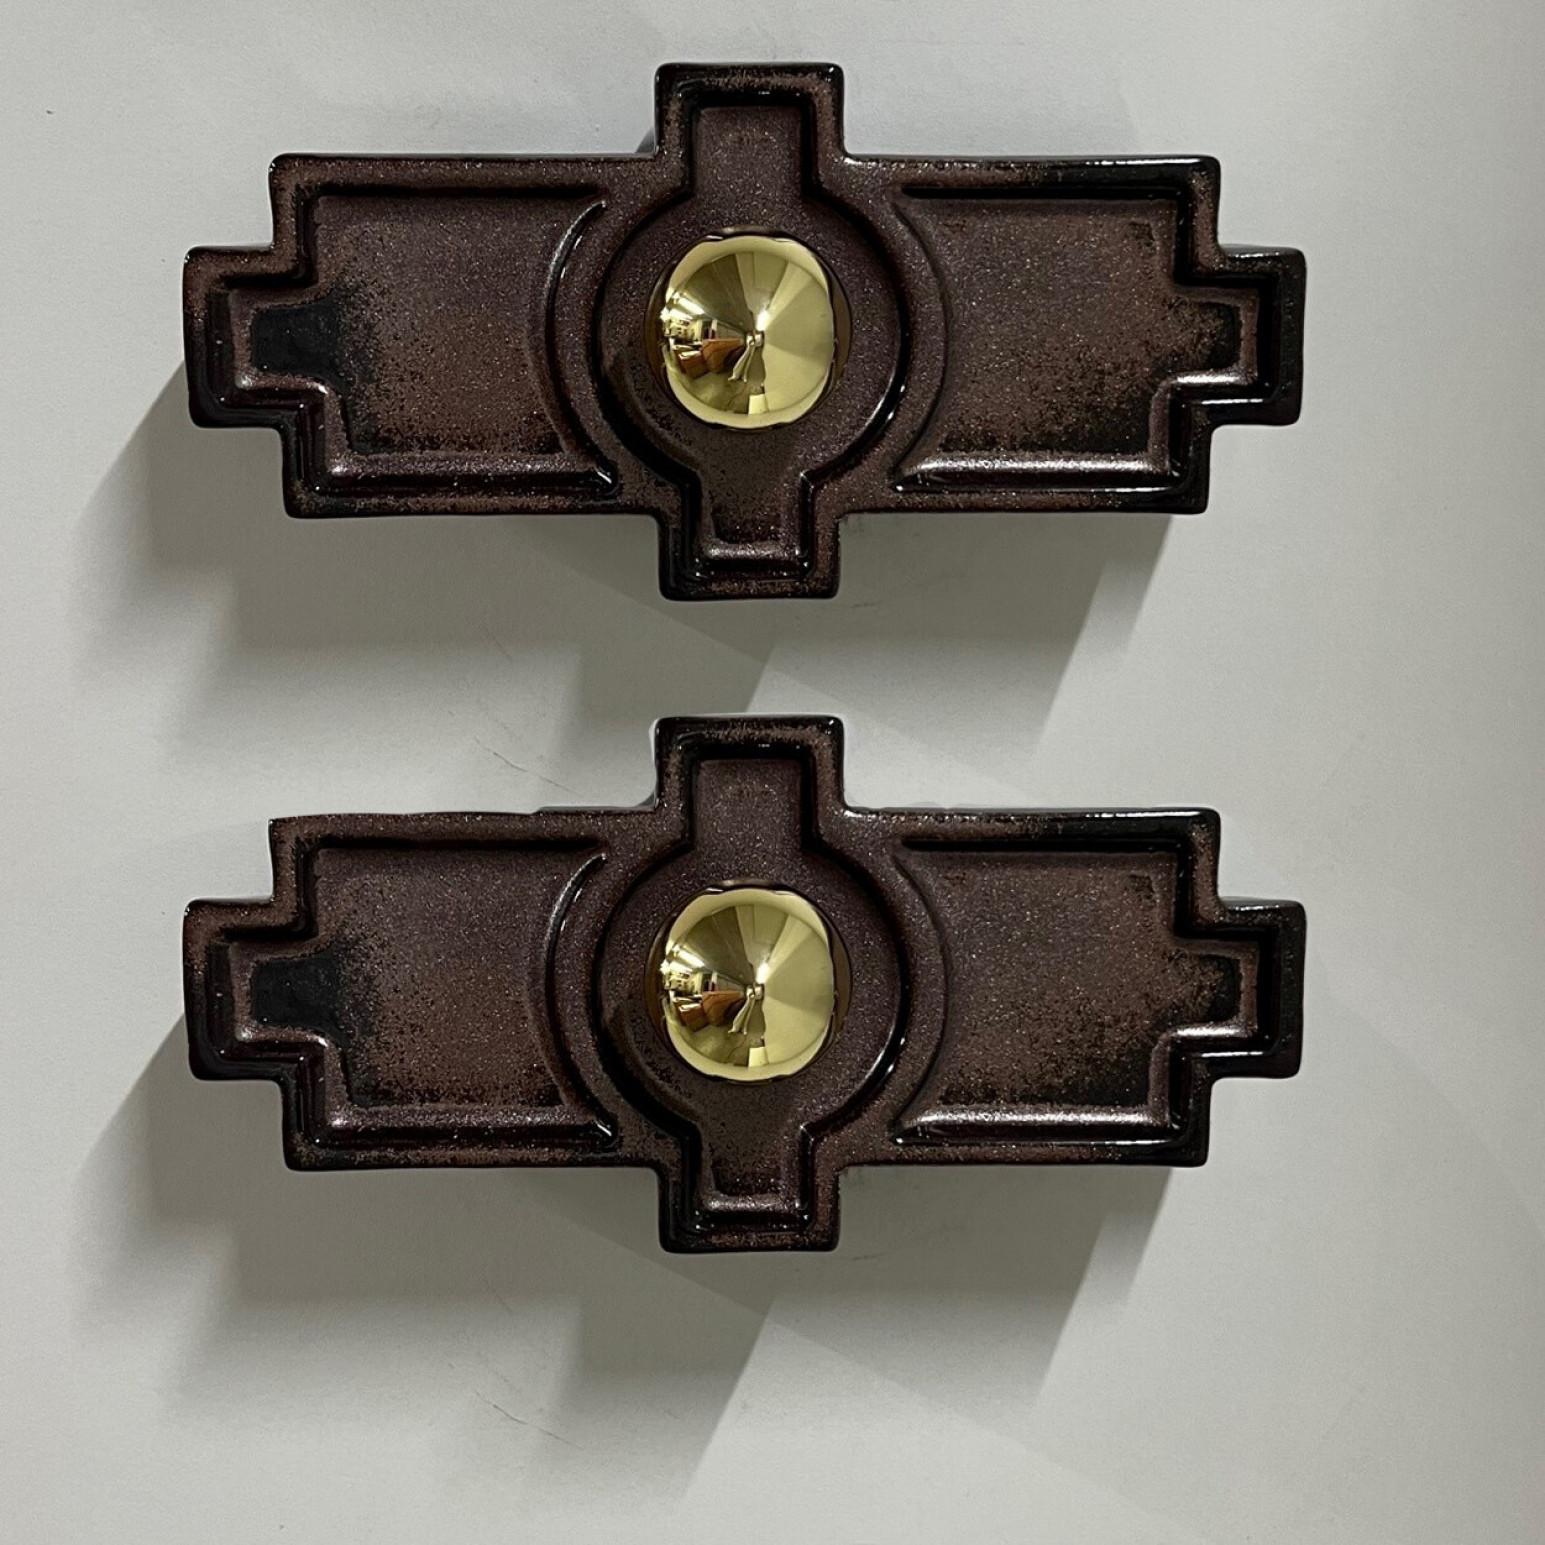 Space Age 1 of 2 Rectangular Brown Ceramic Wall Lights, keramik, Germany, 1970 For Sale